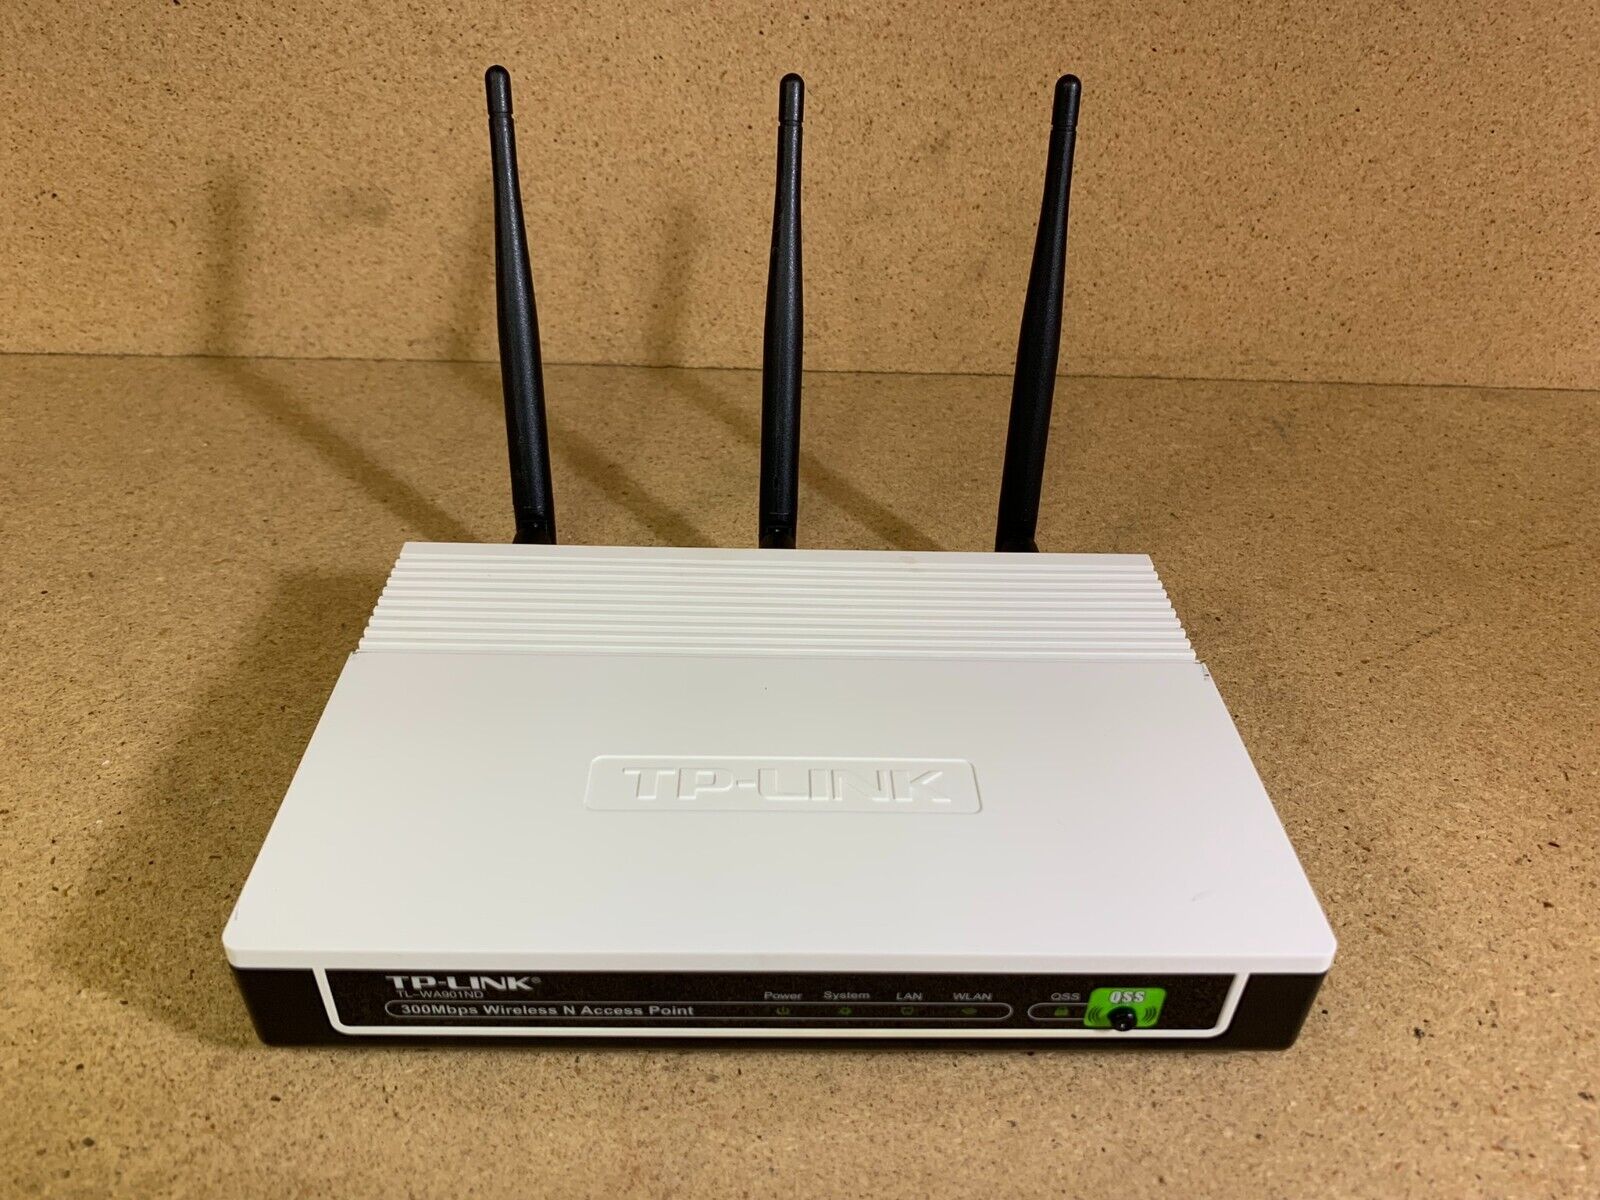 TP-Link TL-WA901ND IEEE 802.11n 300Mbps Wireless Access Point